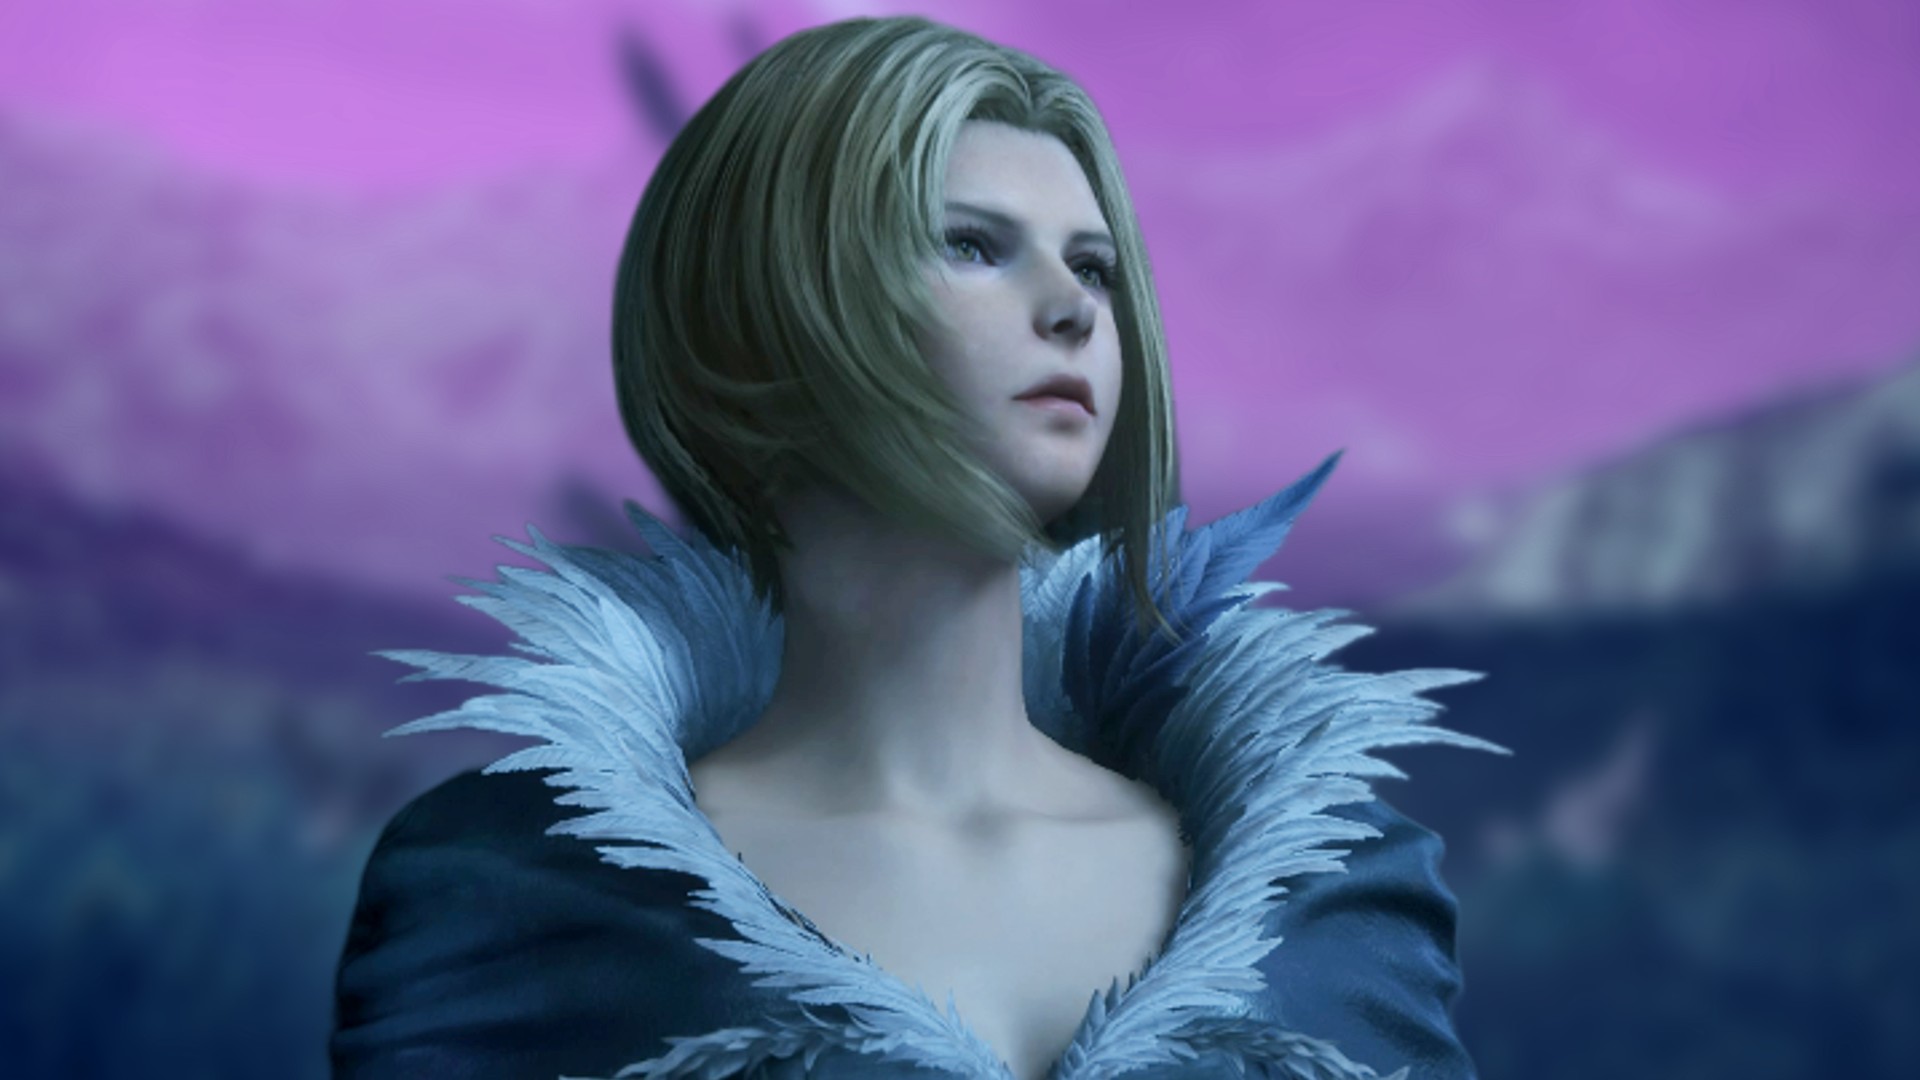 Final Fantasy 16 is the best PS5 exclusive I've played so far